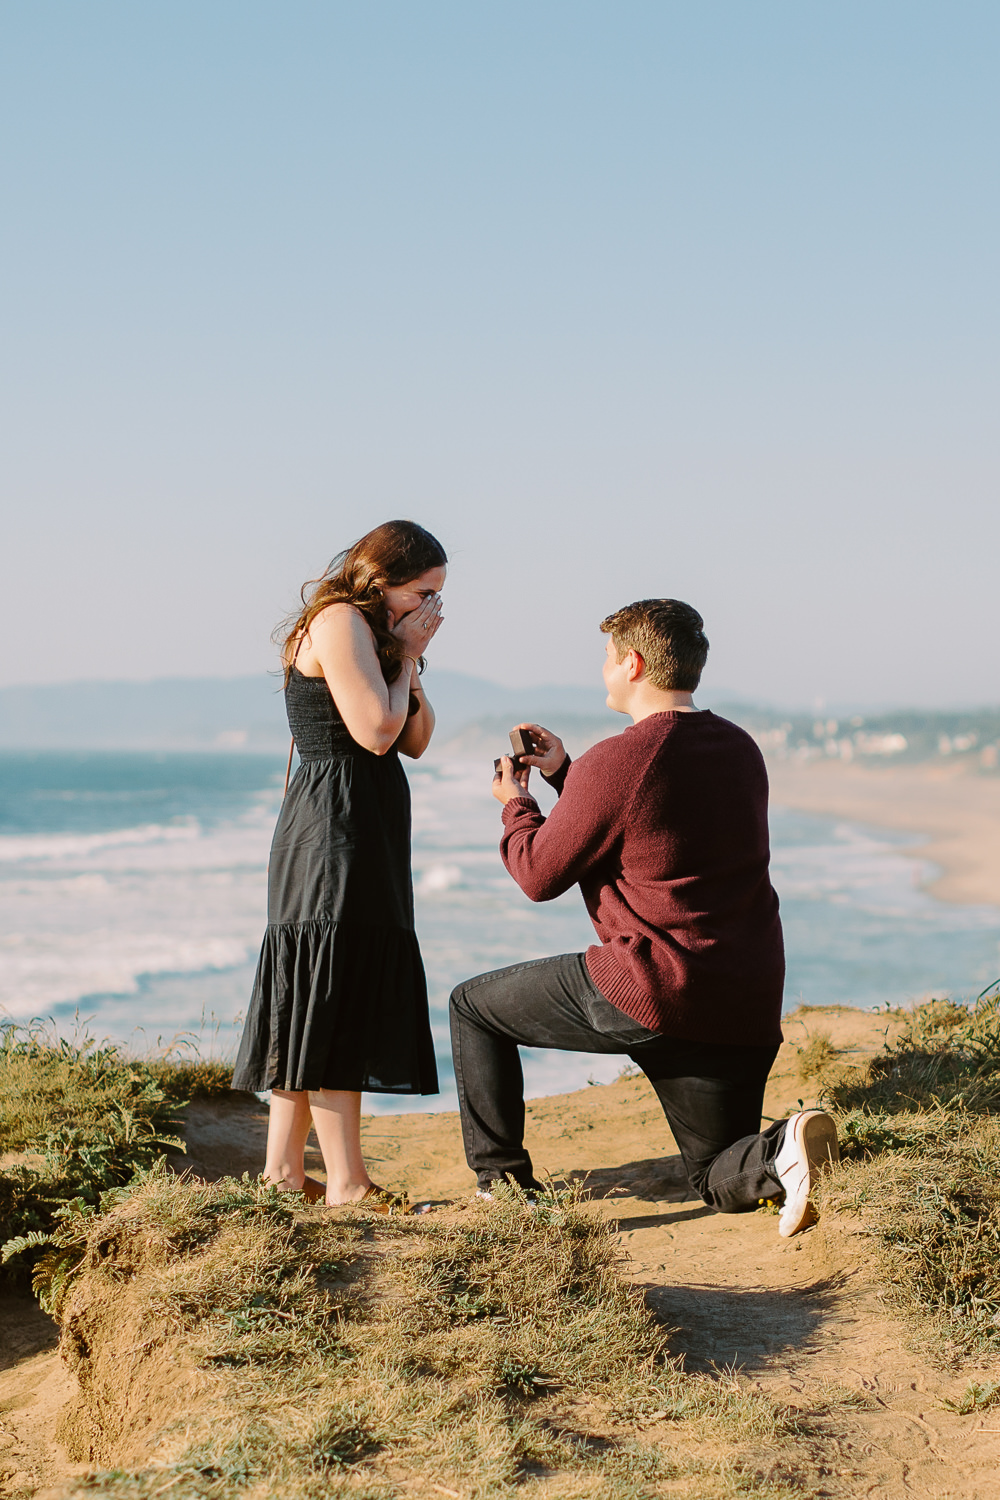 a man proposes to a woman on a beach. 